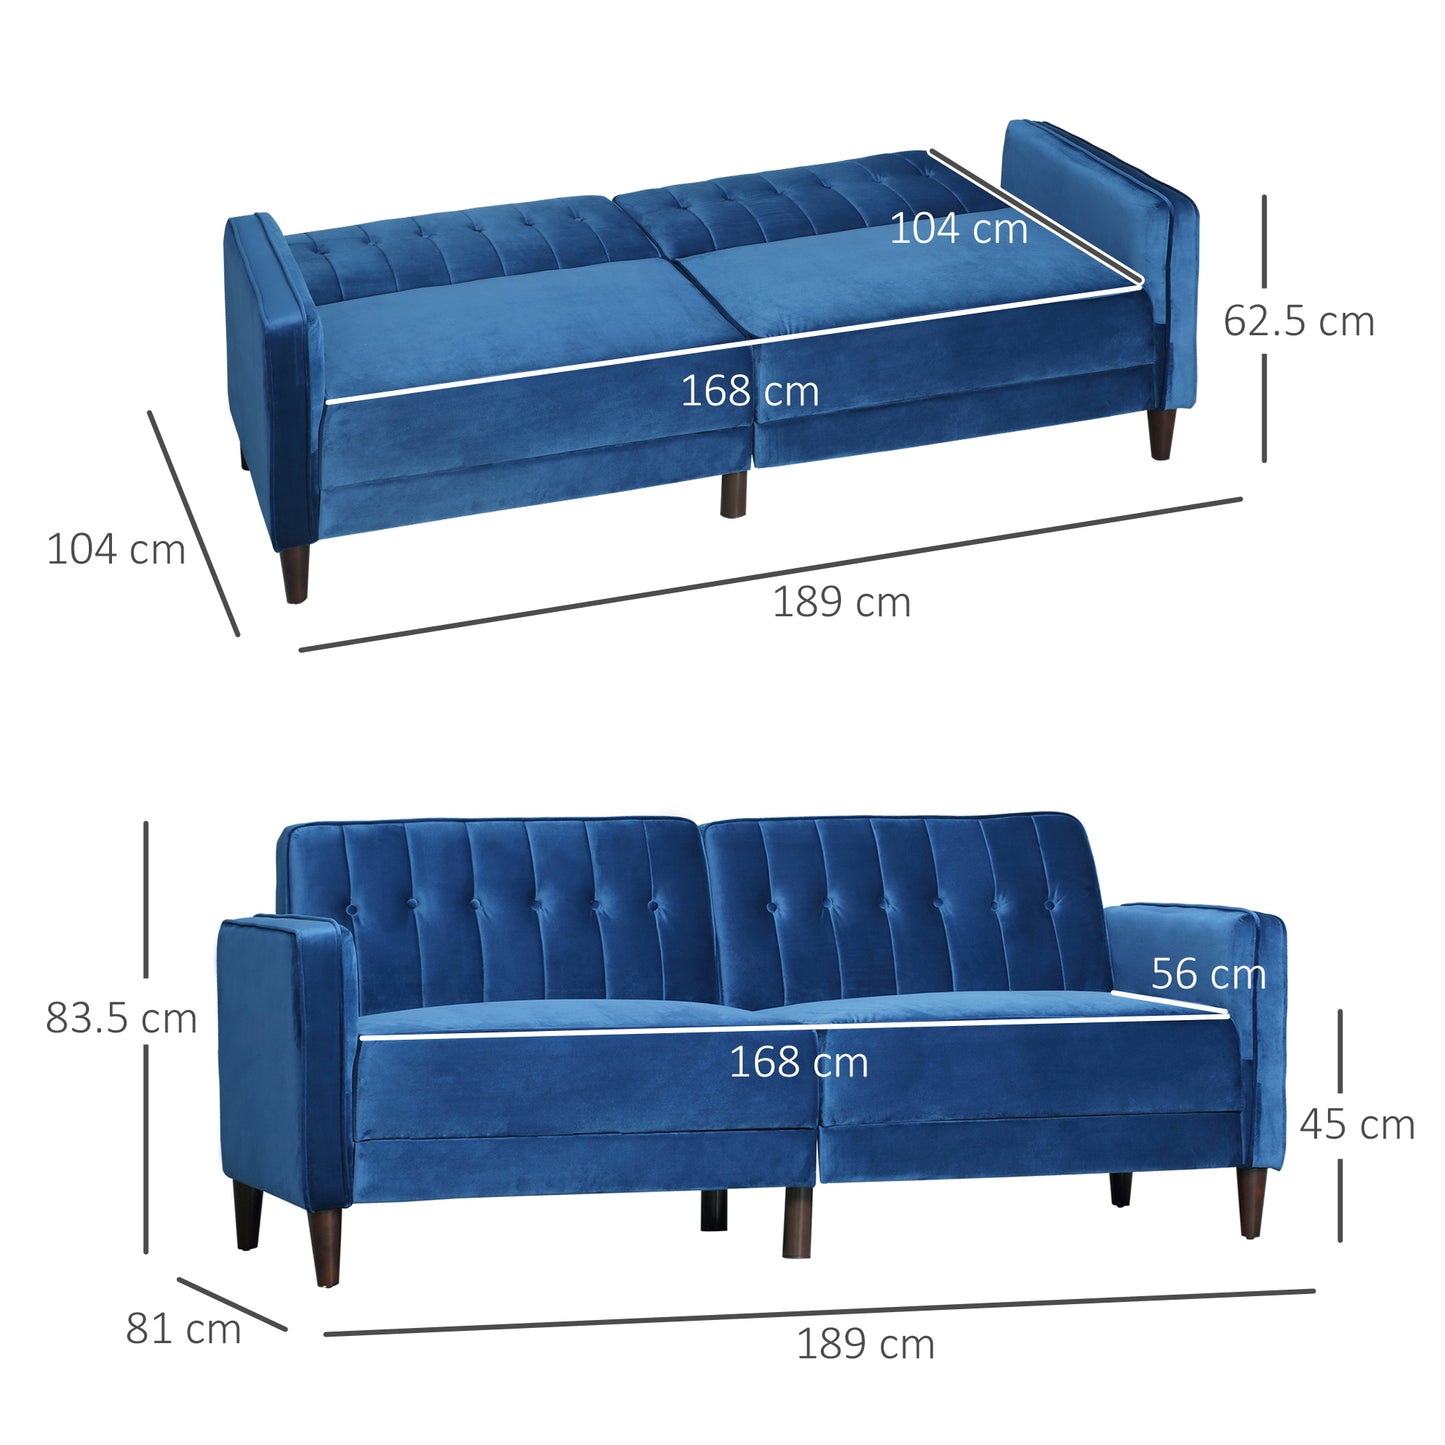 HOMCOM Modern Convertible Sofa Futon Velvet-Touch Tufted Couch Compact Loveseat Sleeper Sofa Bed, Blue